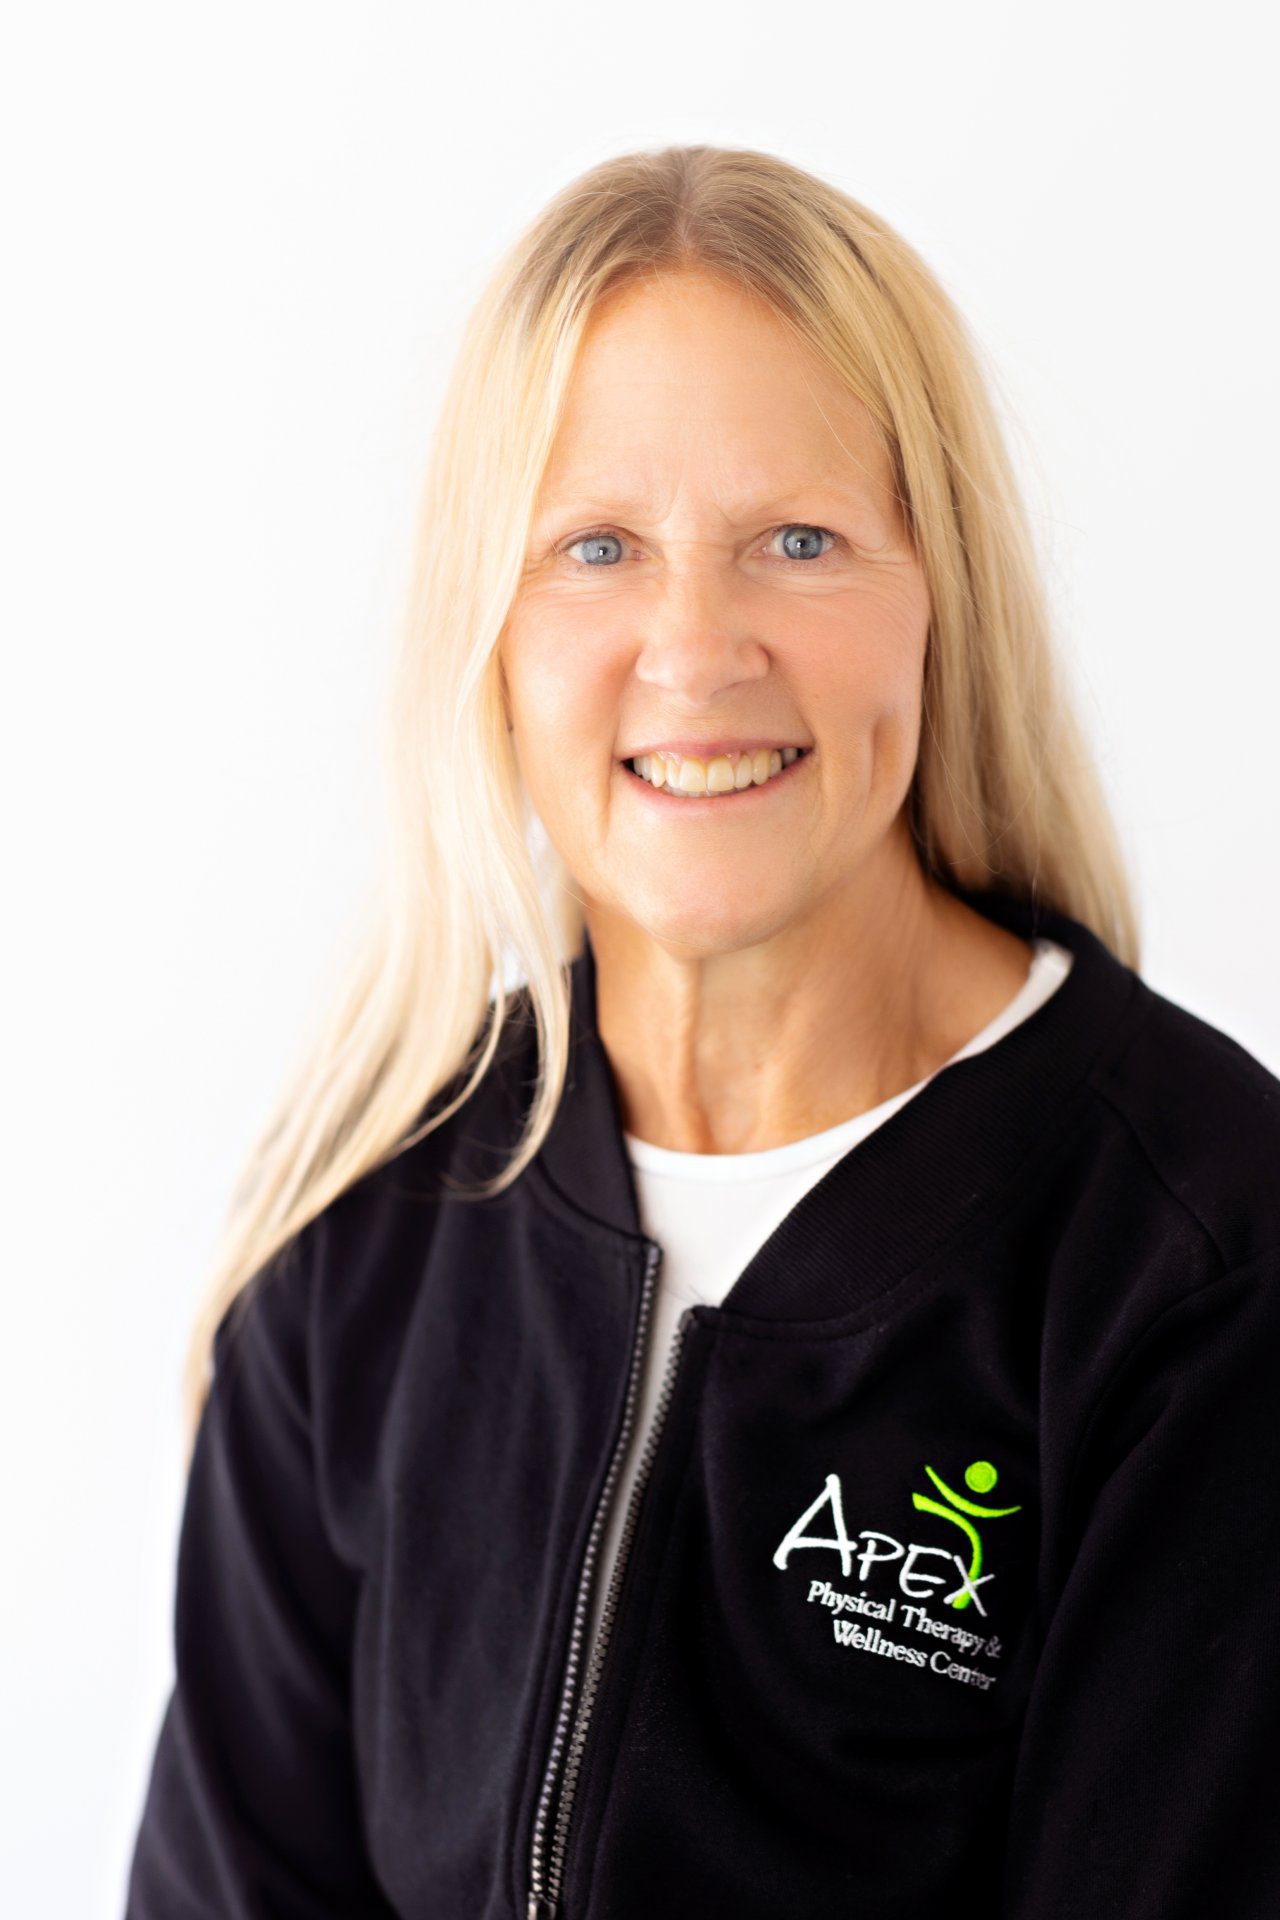 A professional portrait of Teresa Hanson smiling with blonde hair, wearing a black jacket with the Apex Physical Therapy & Wellness Center logo.